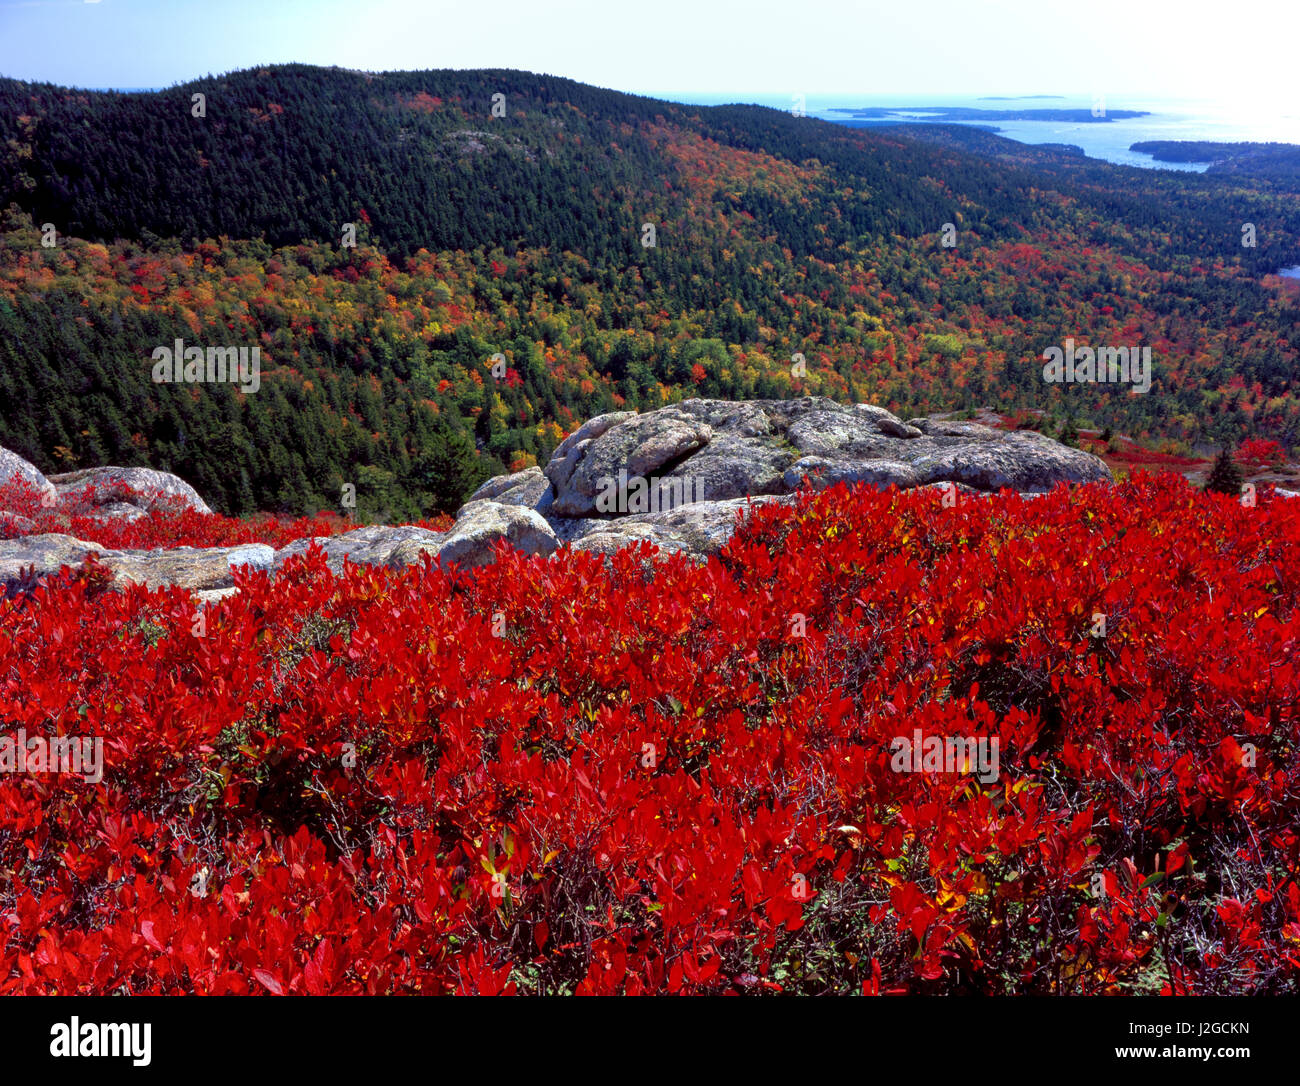 Acadia National Park, Maine. USA. Scarlet foliage of black huckleberry (Gaylussacia baccata) above forest in autumn. View from Bald Peak. Mt. Desert Island. (Large format sizes available) Stock Photo